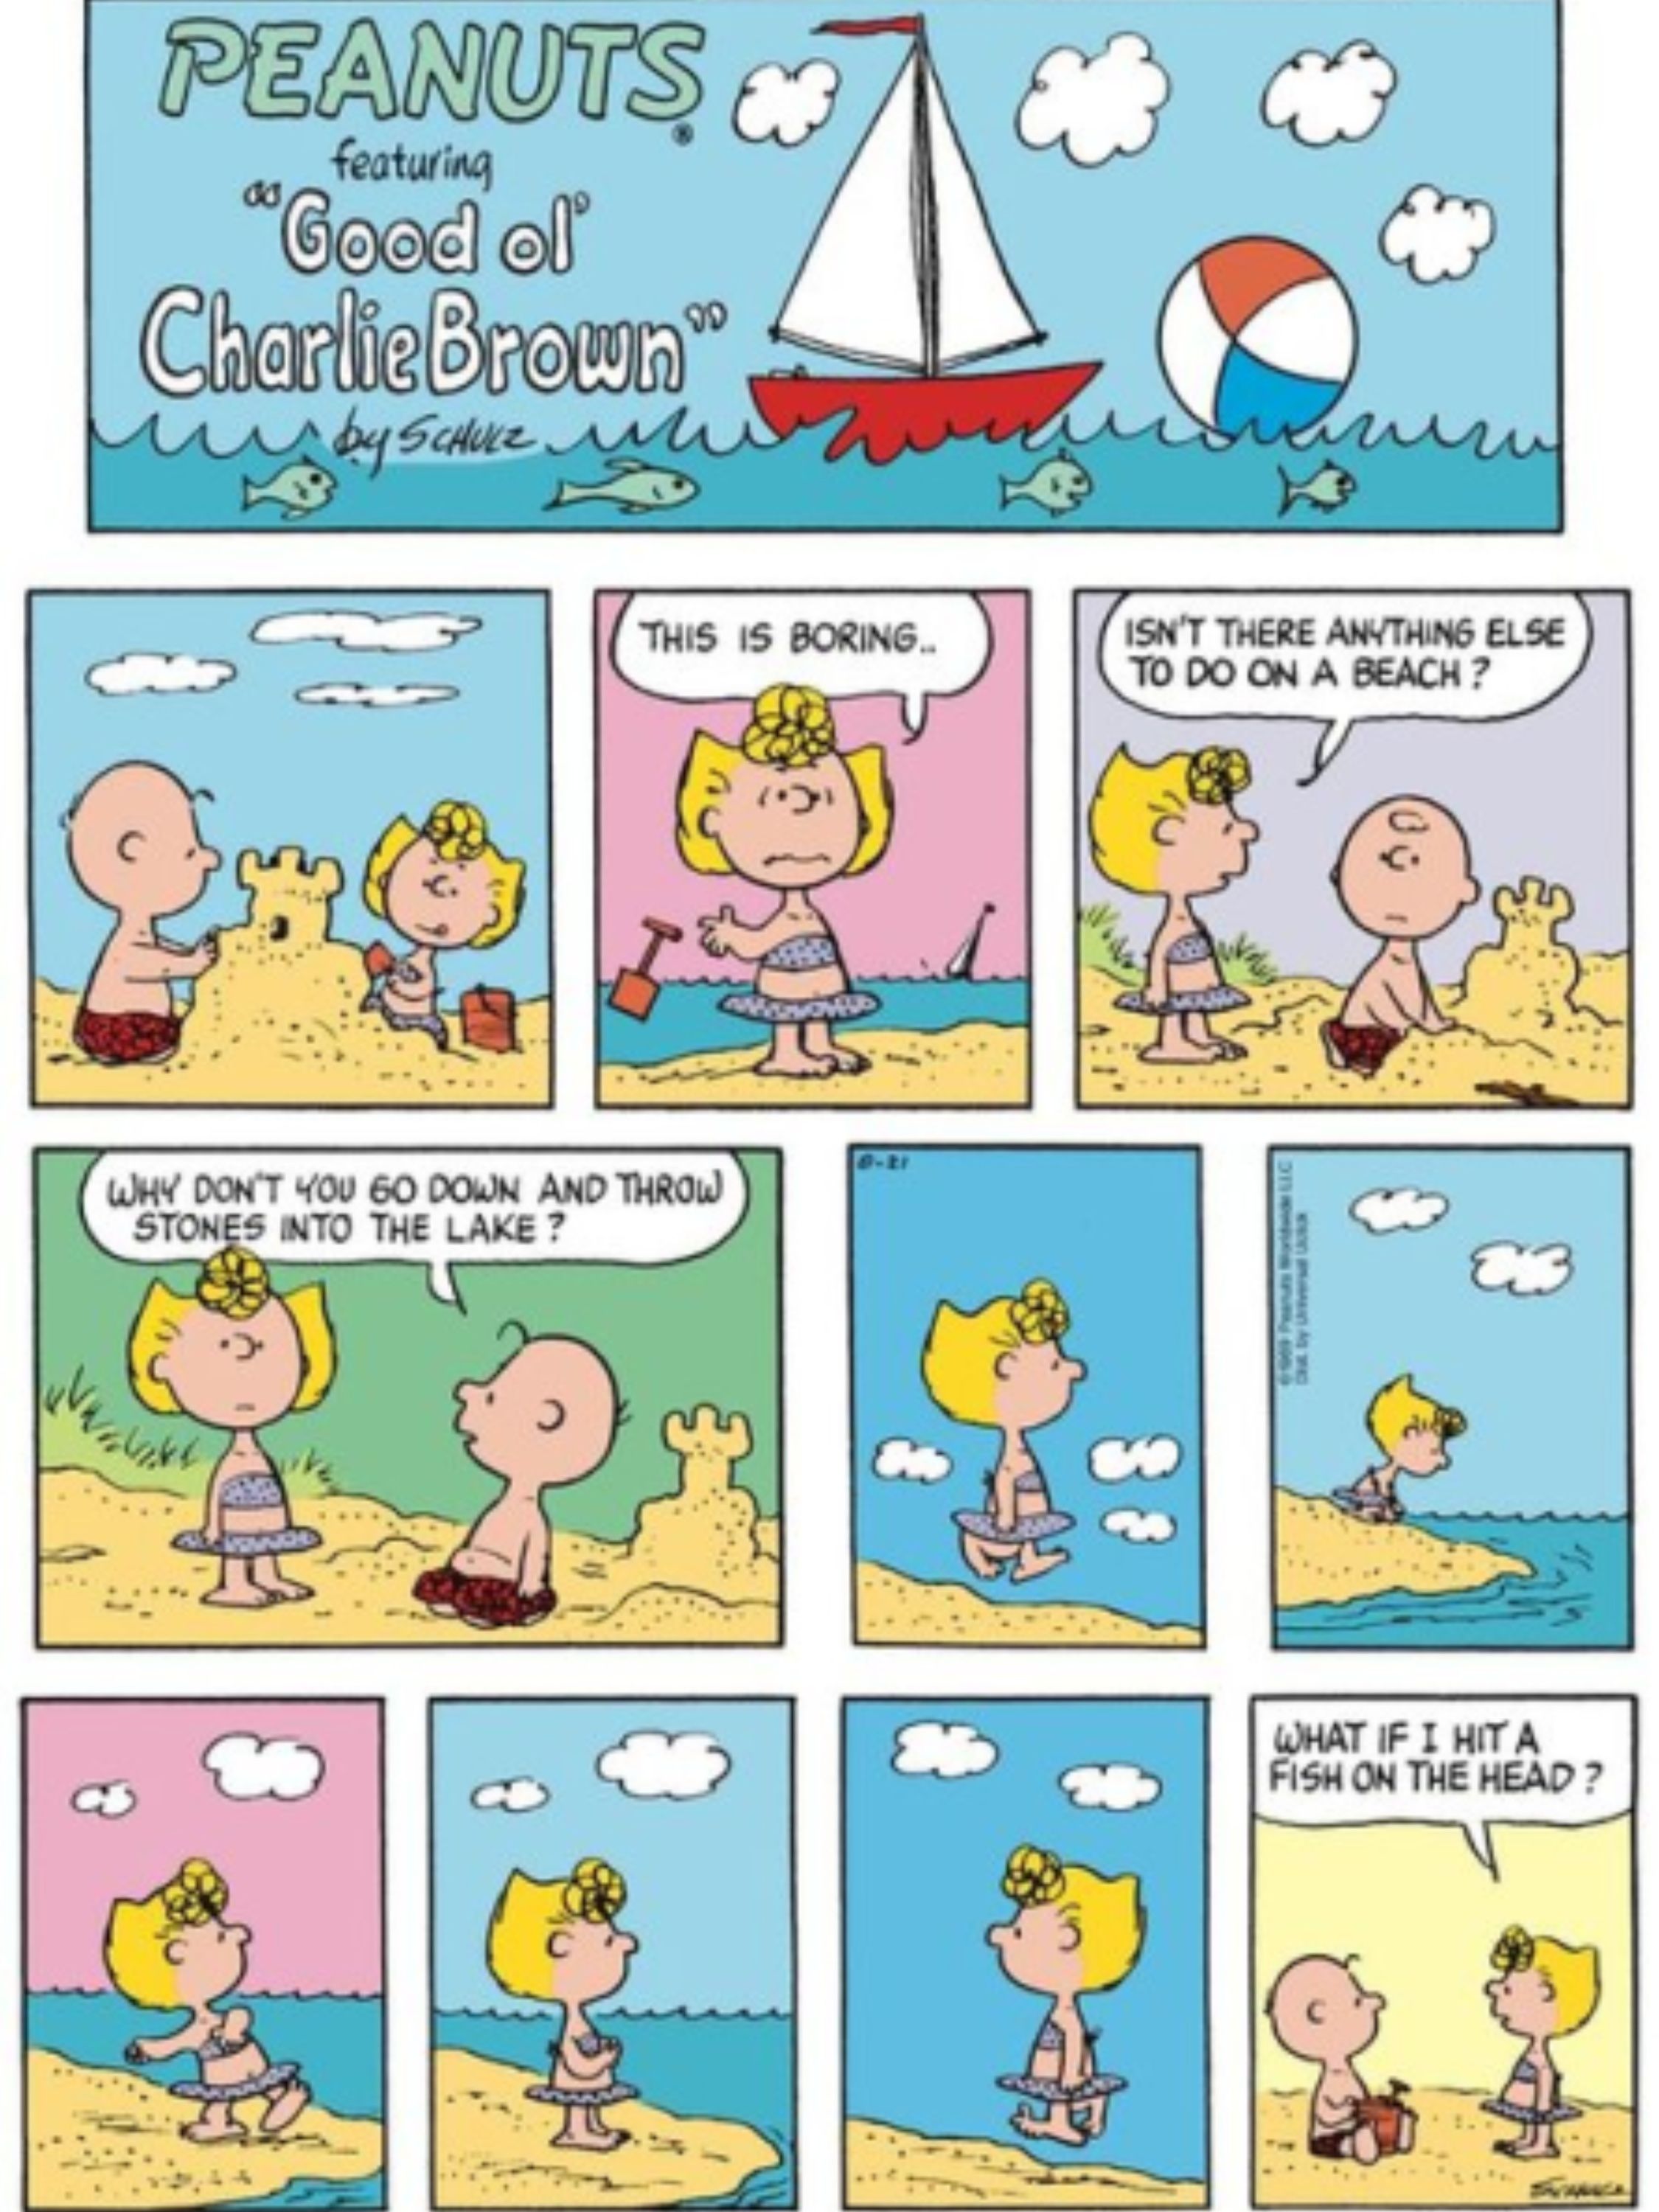 Sally and Charlie Brown at the beach.